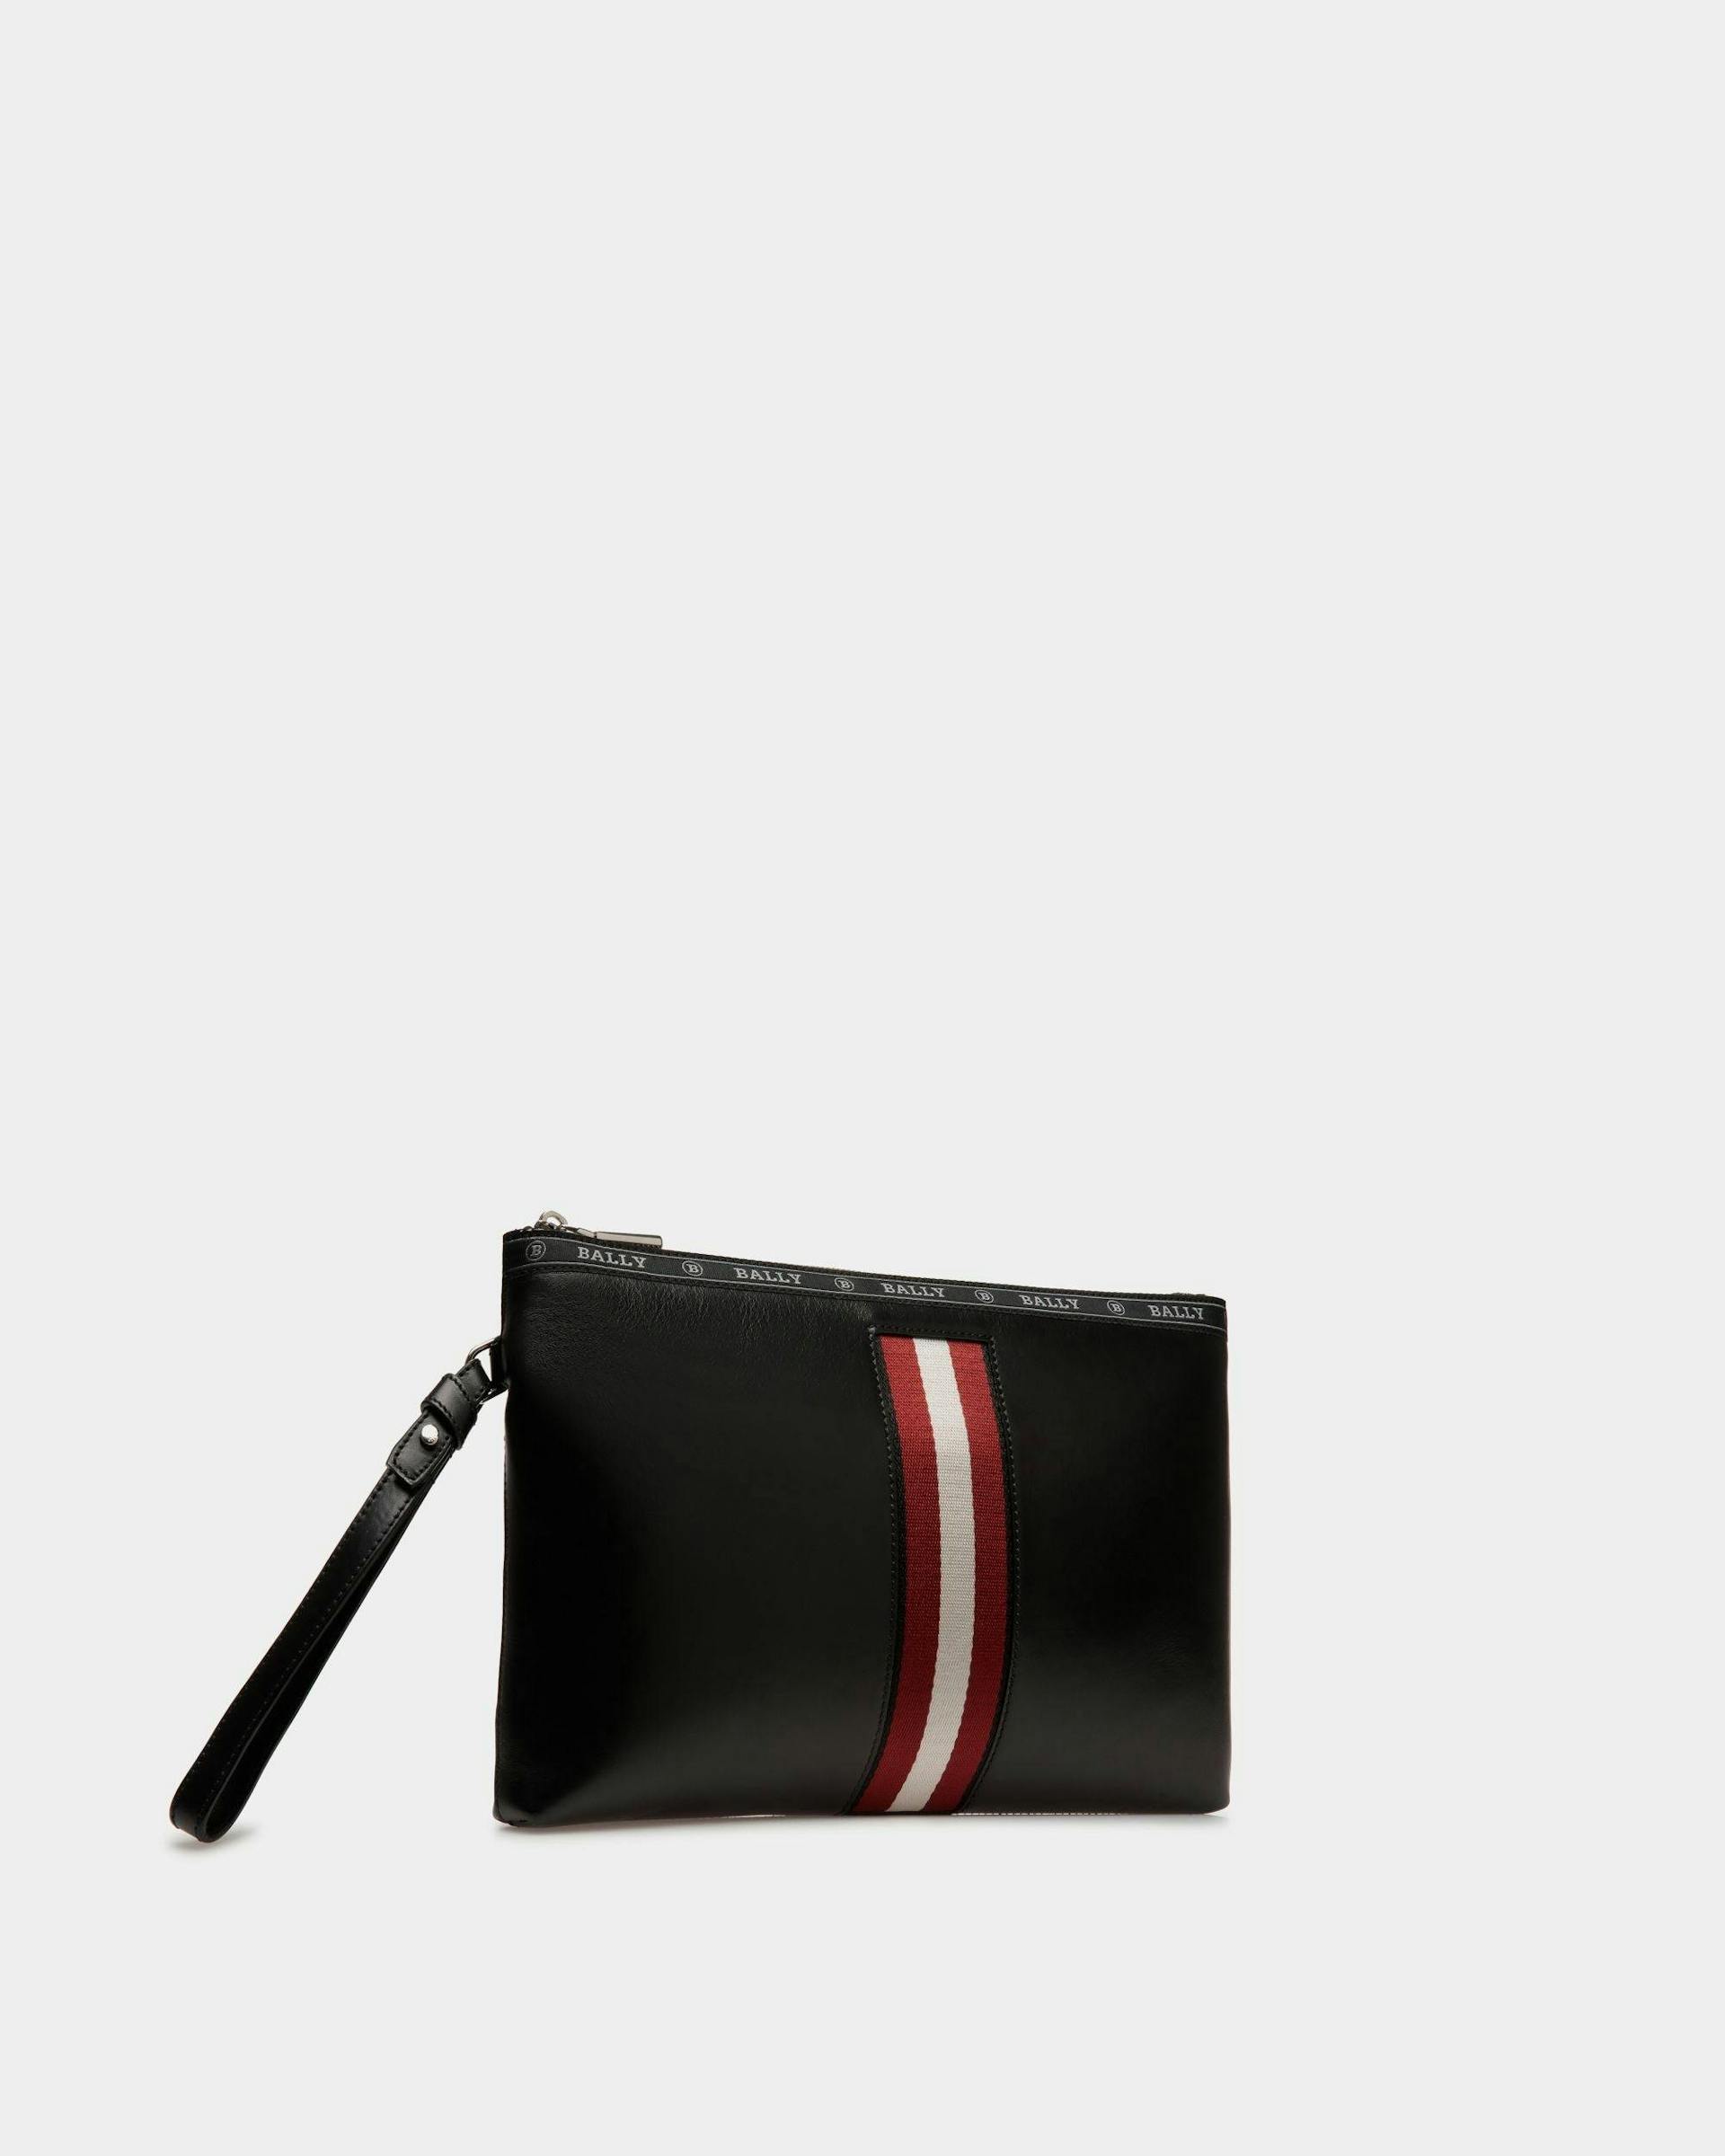 Men's Hartland Leather Clutch Bag In Black | Bally | Still Life 3/4 Front